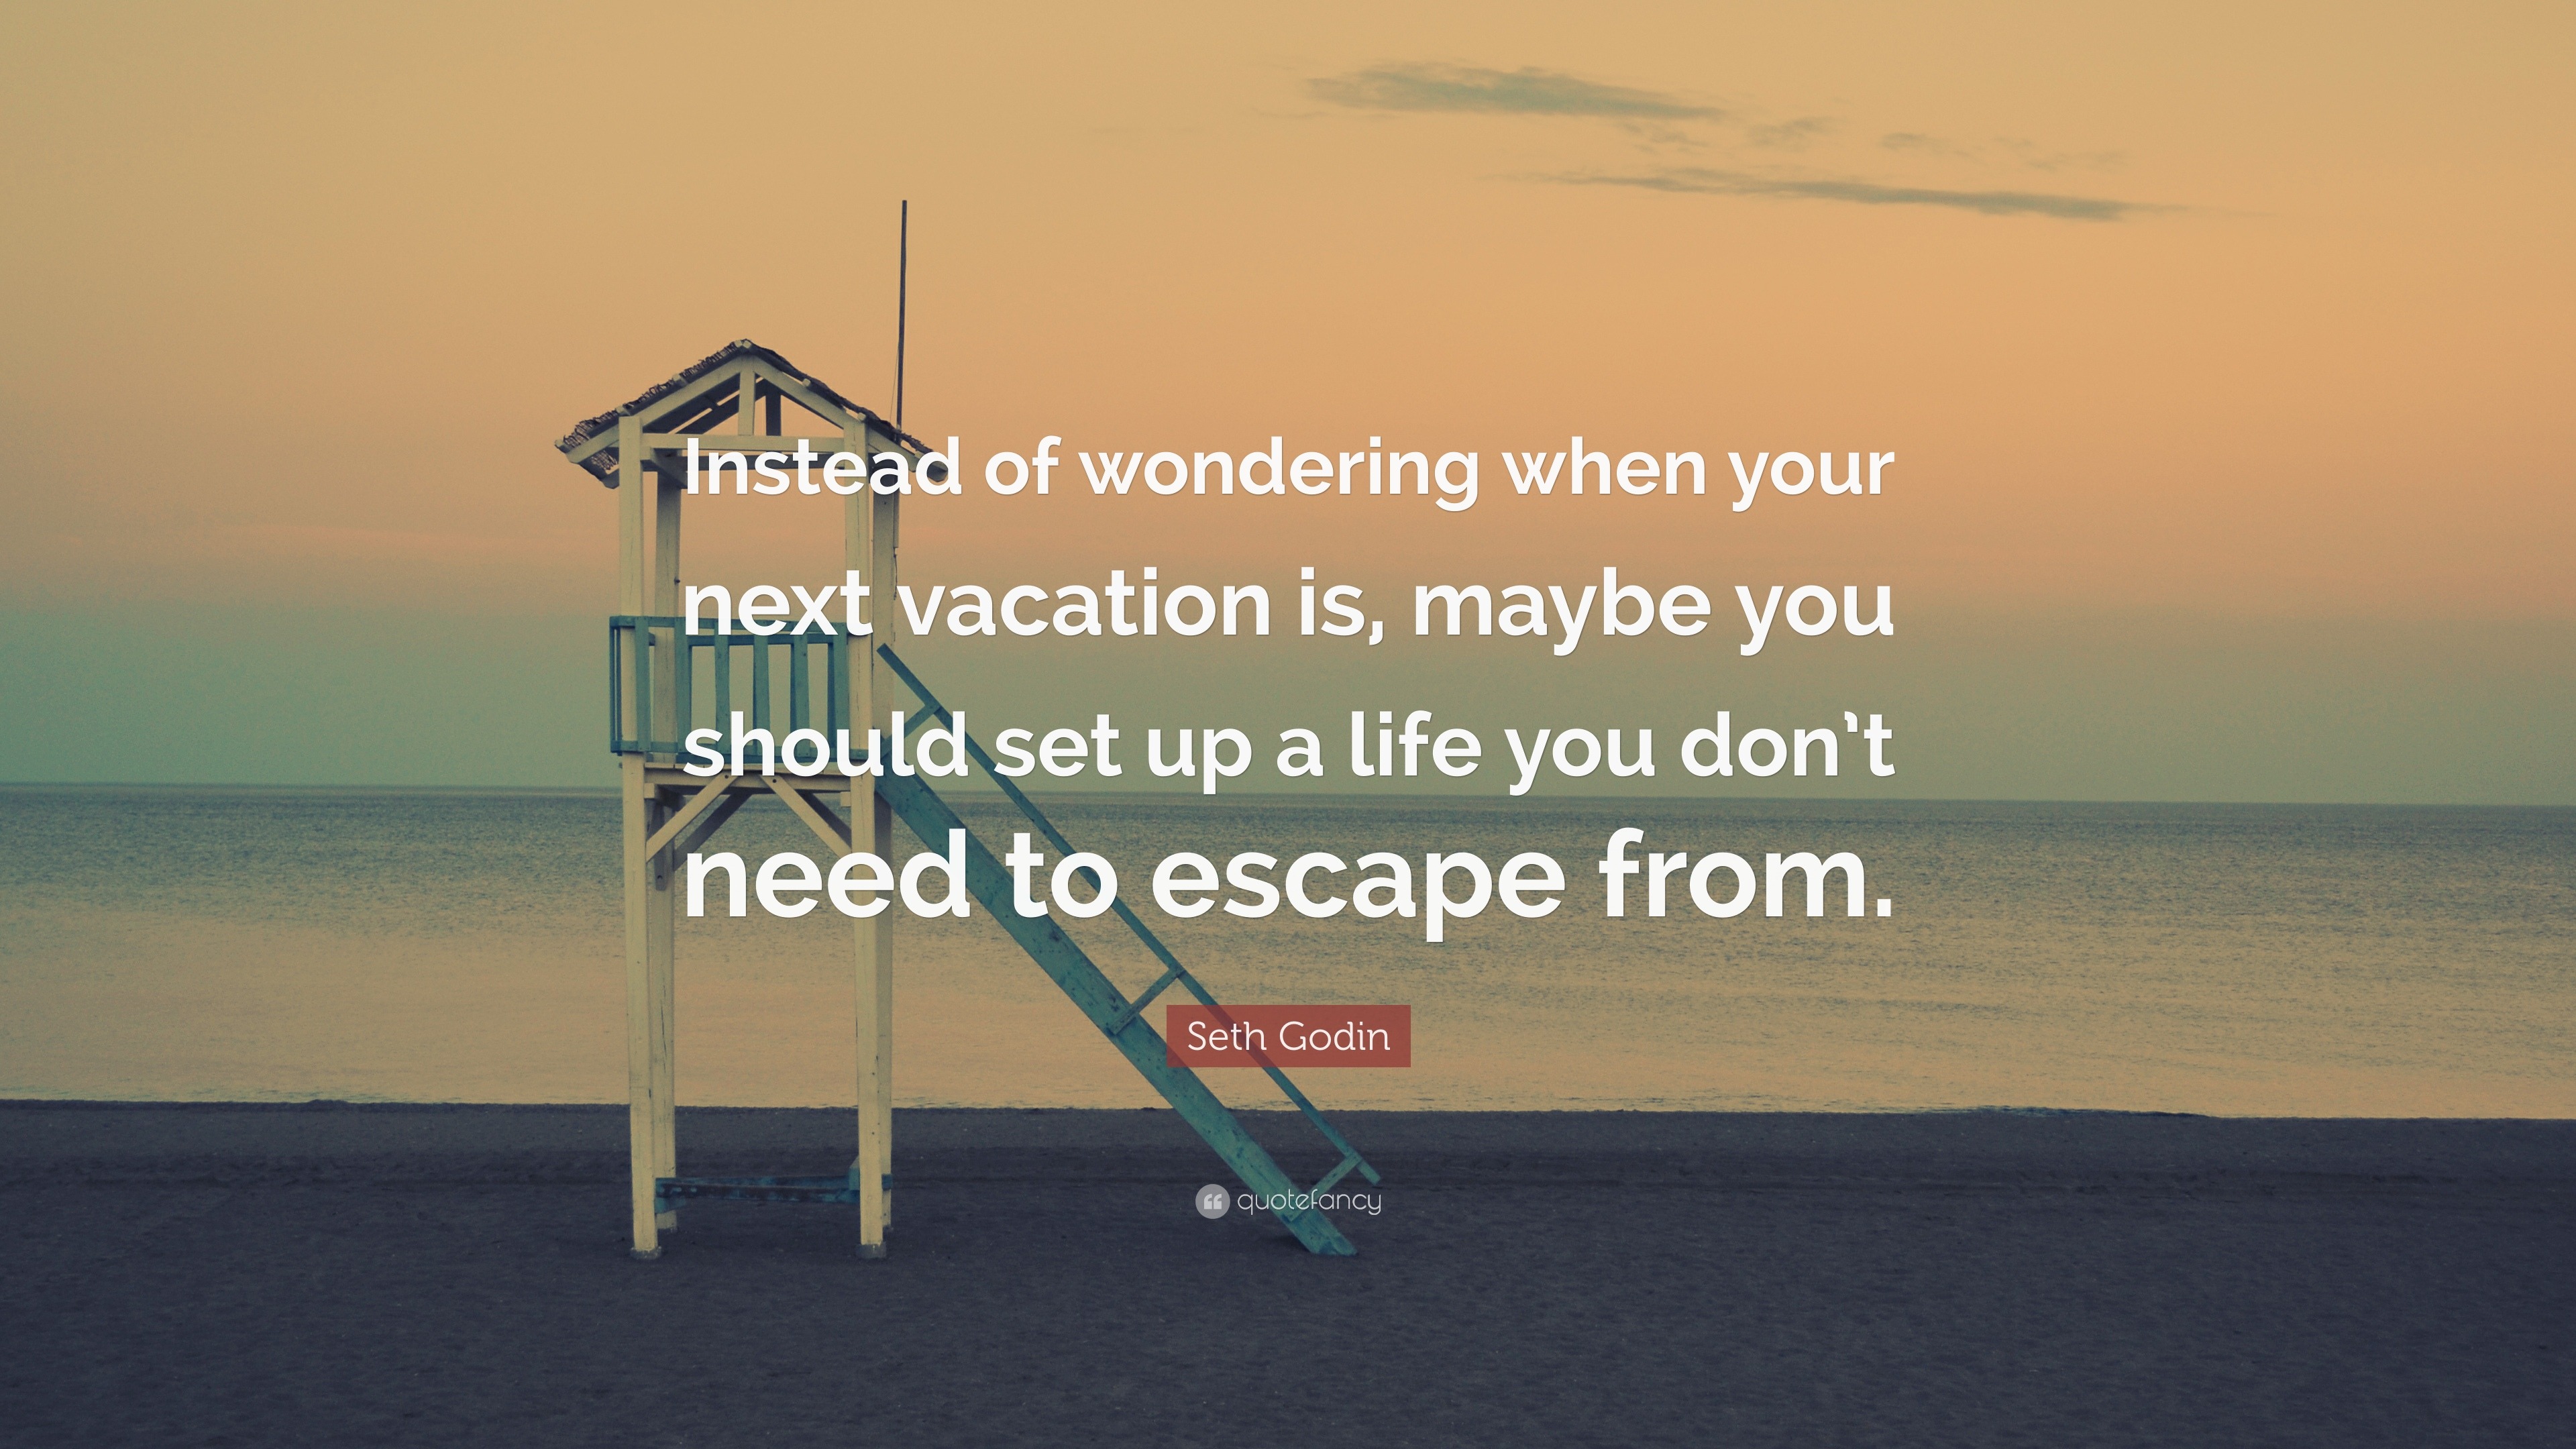 Seth Godin Quote: “Instead of wondering when your next vacation is